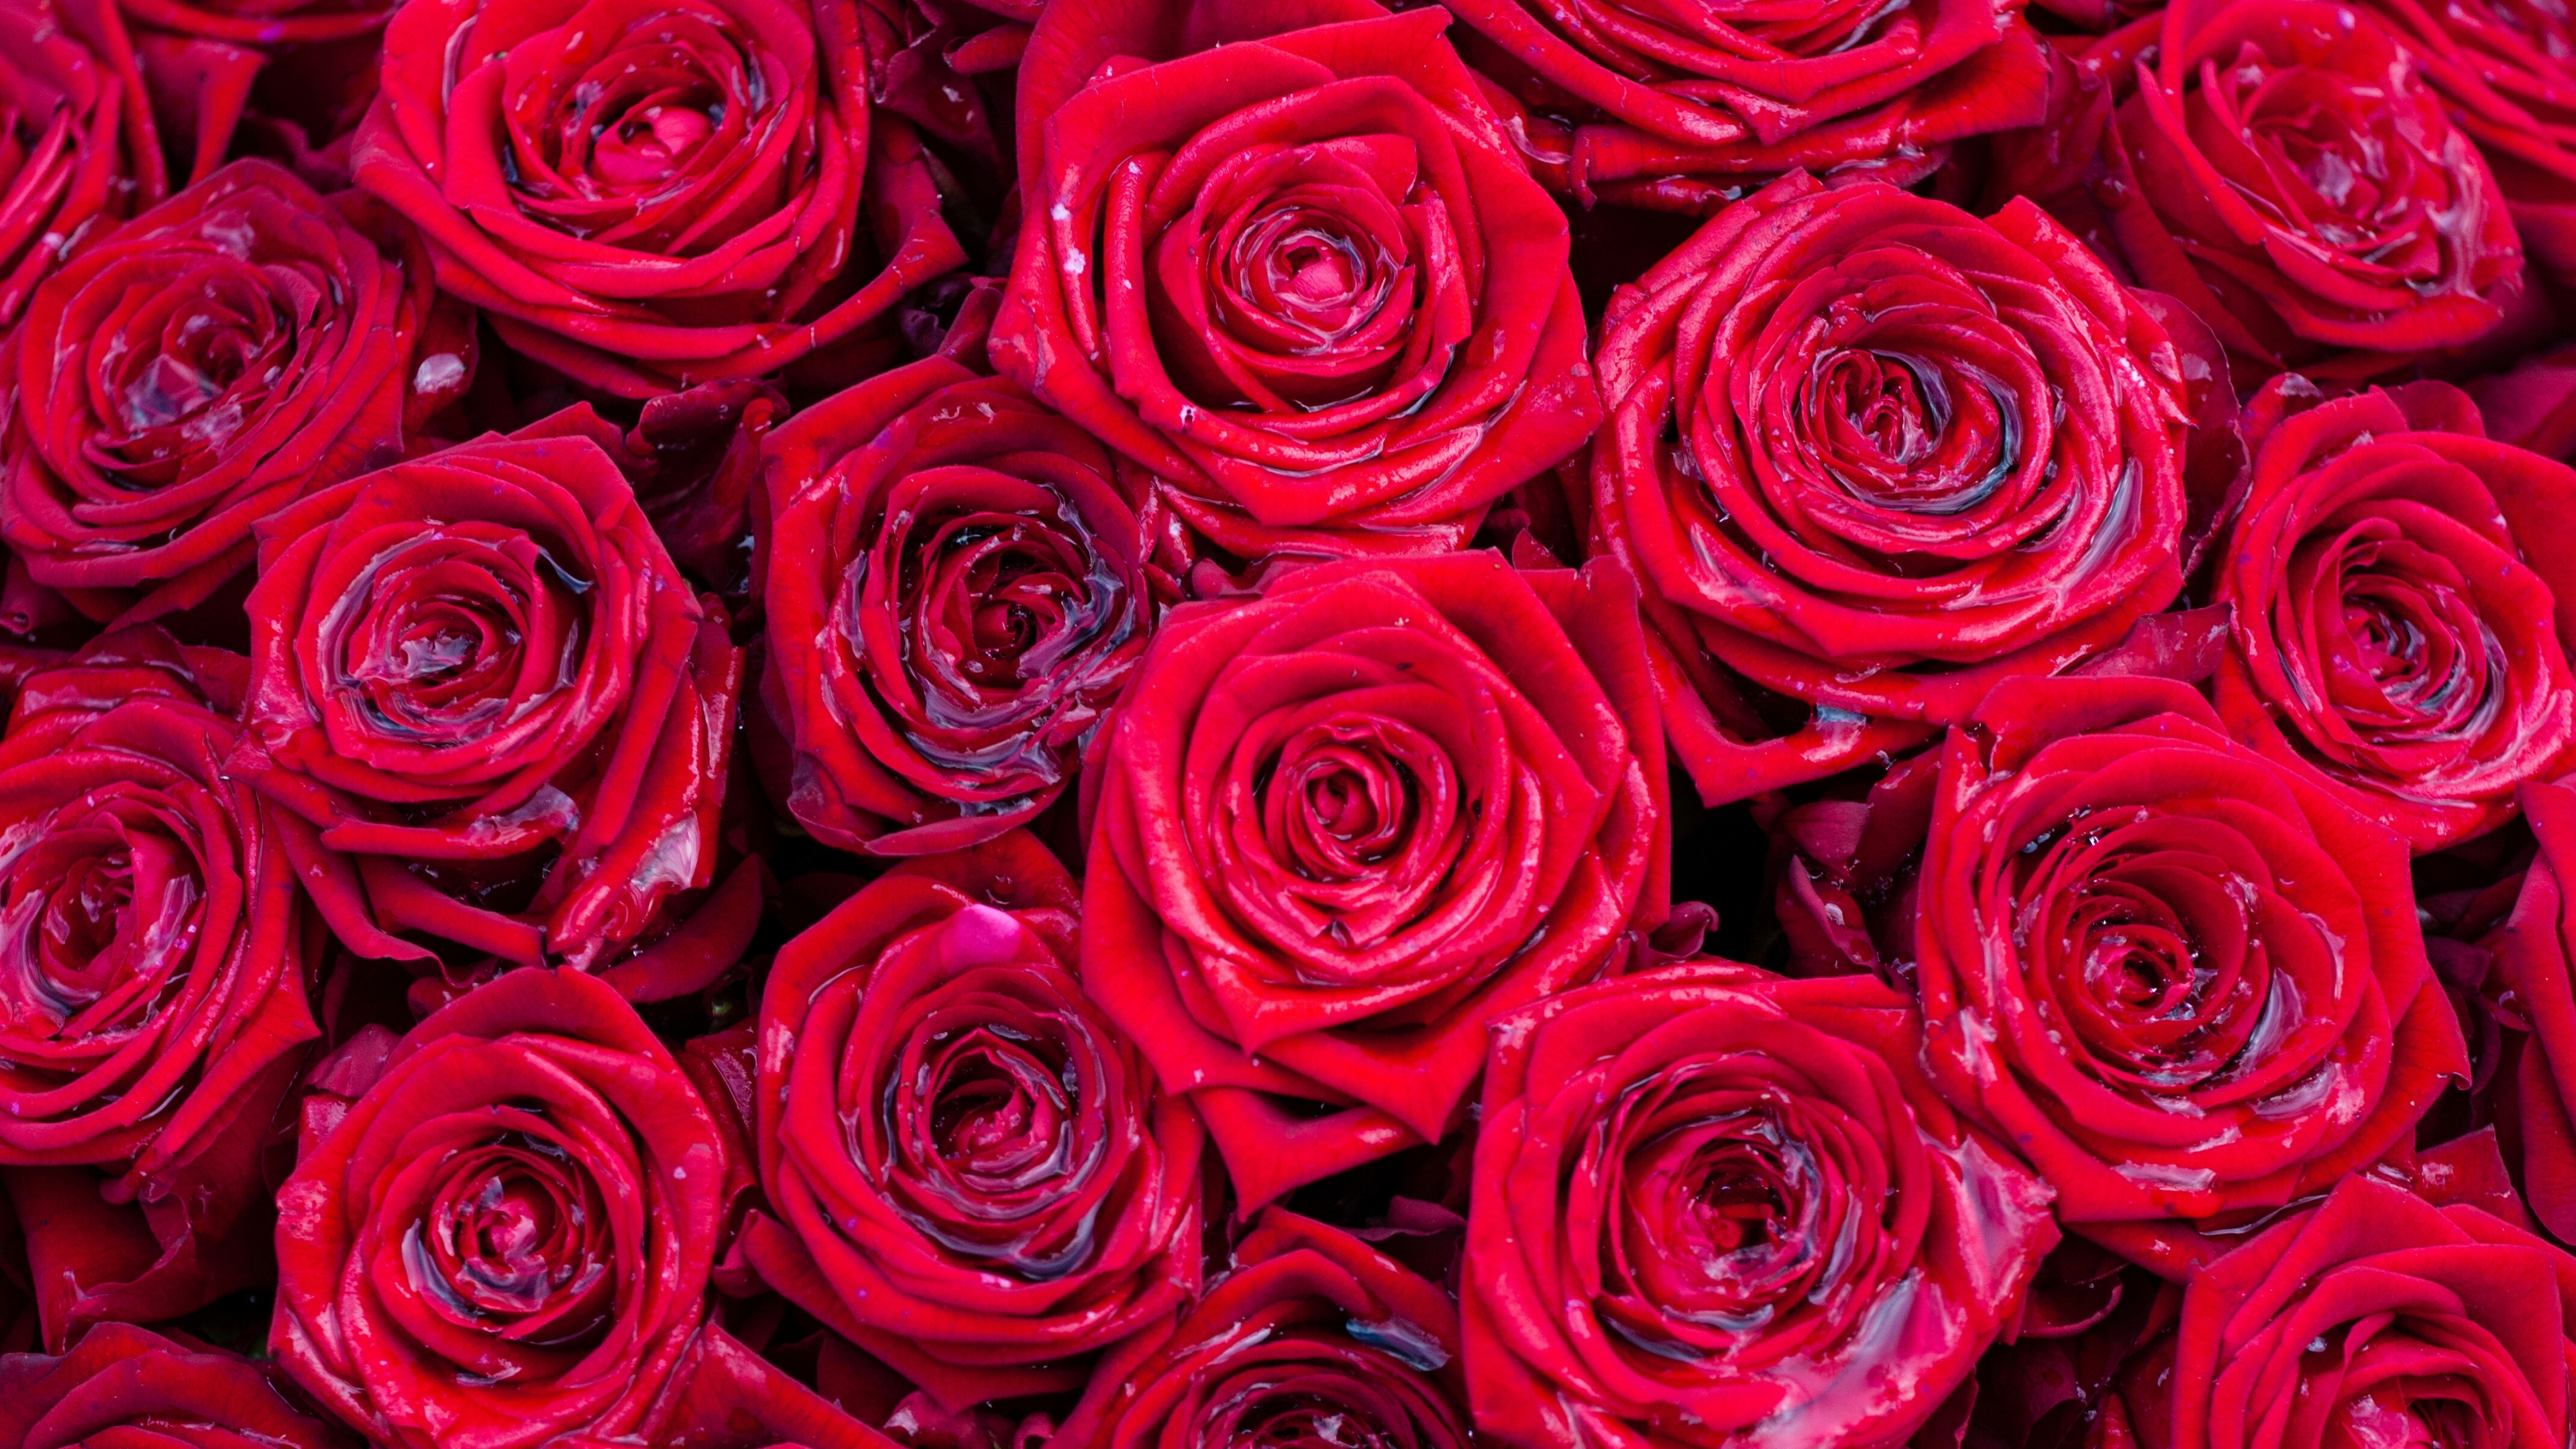 Red Roses in Close up Photography. Wallpaper in 3840x2160 Resolution